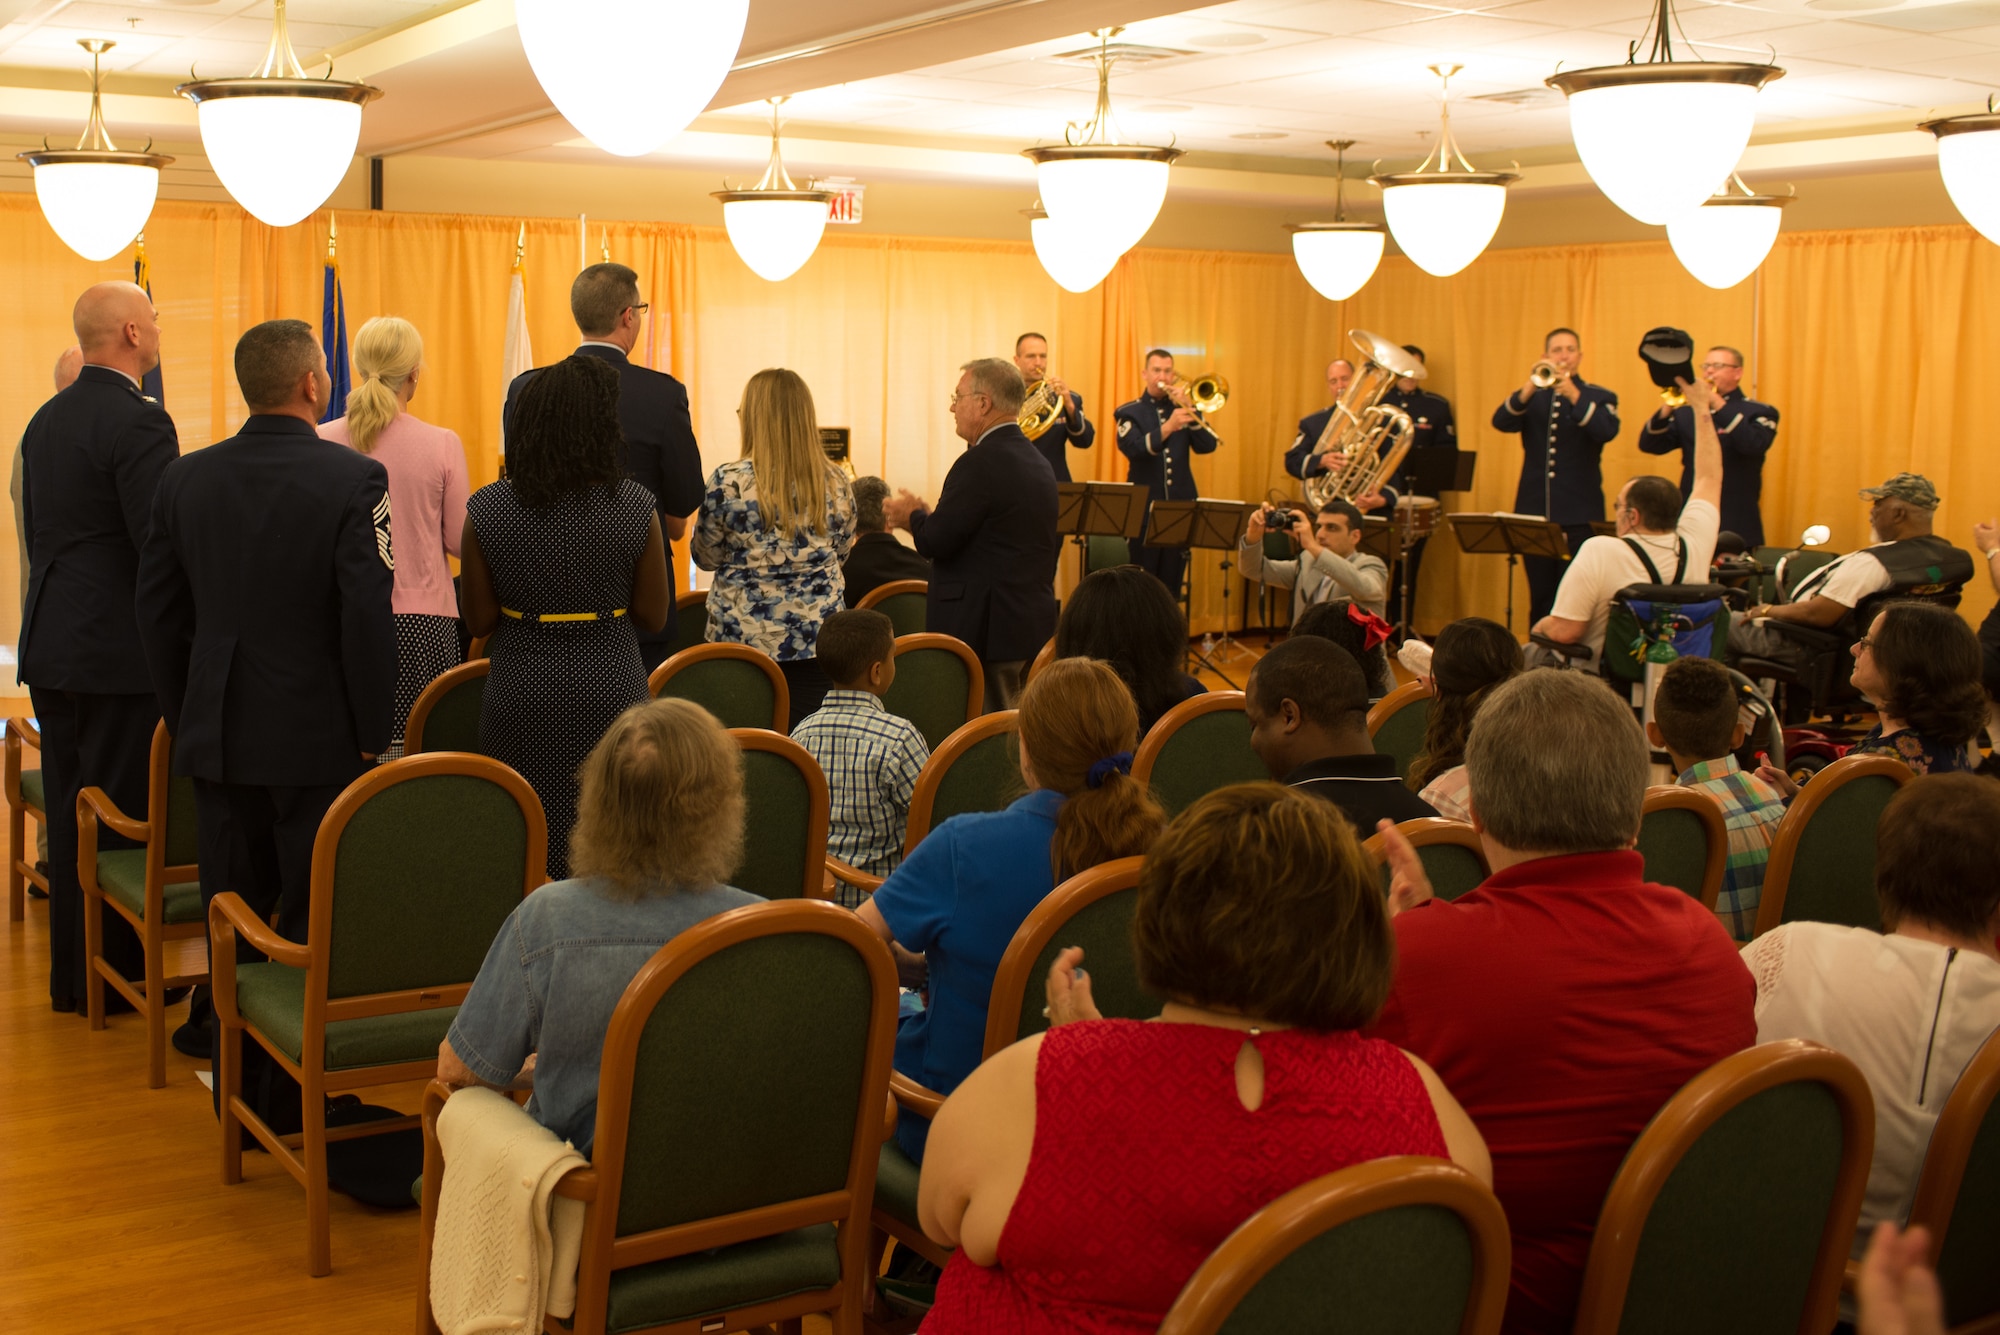 The Heartland of America Band’s Offutt Brass plays the Air Force Song at a Memorial Day ceremony at the Eastern Nebraska Veterans’ Home May 28, 2018, Bellevue, Nebraska. As part of the ceremony, current and former service members stood and sang when their respective service’s song was played while the rest of the audience clapped along in support. (U.S. Air Force photo by Paul Shirk)